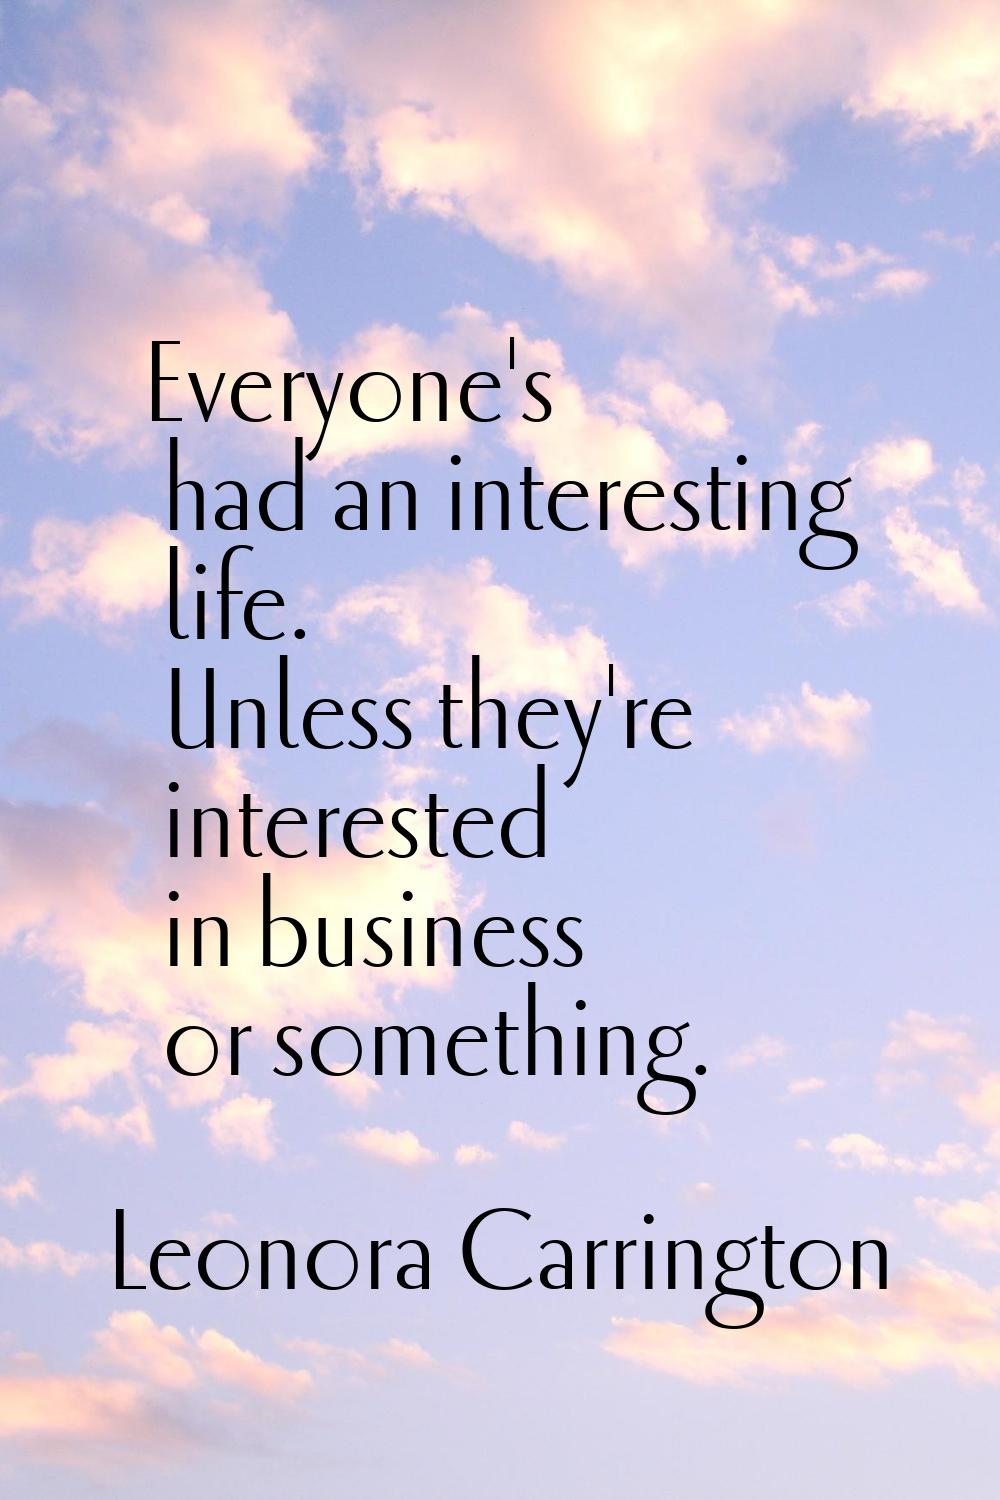 Everyone's had an interesting life. Unless they're interested in business or something.